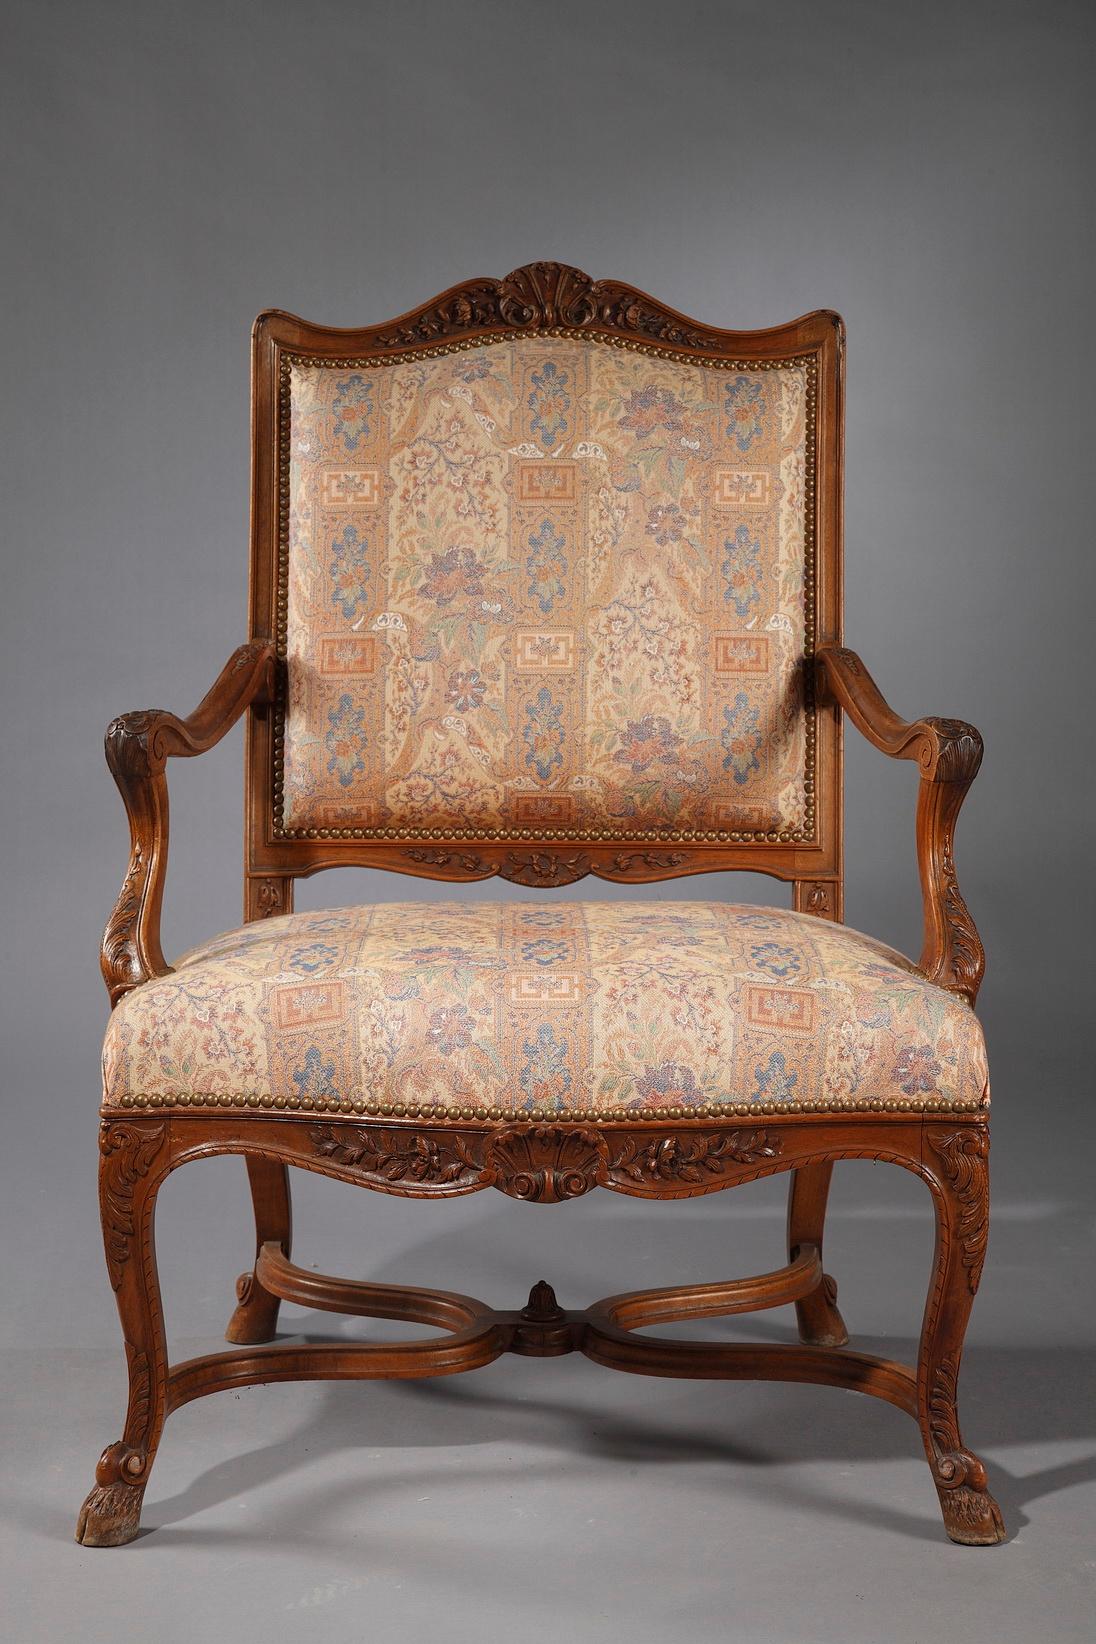 A very fine eight pieces set composed of four armchairs and two matching chairs with their stretcher, and a further pair of chairs, all finely carved in the Regence style. Ornated with foliate shells, small flower garlands and beautiful acanthuses